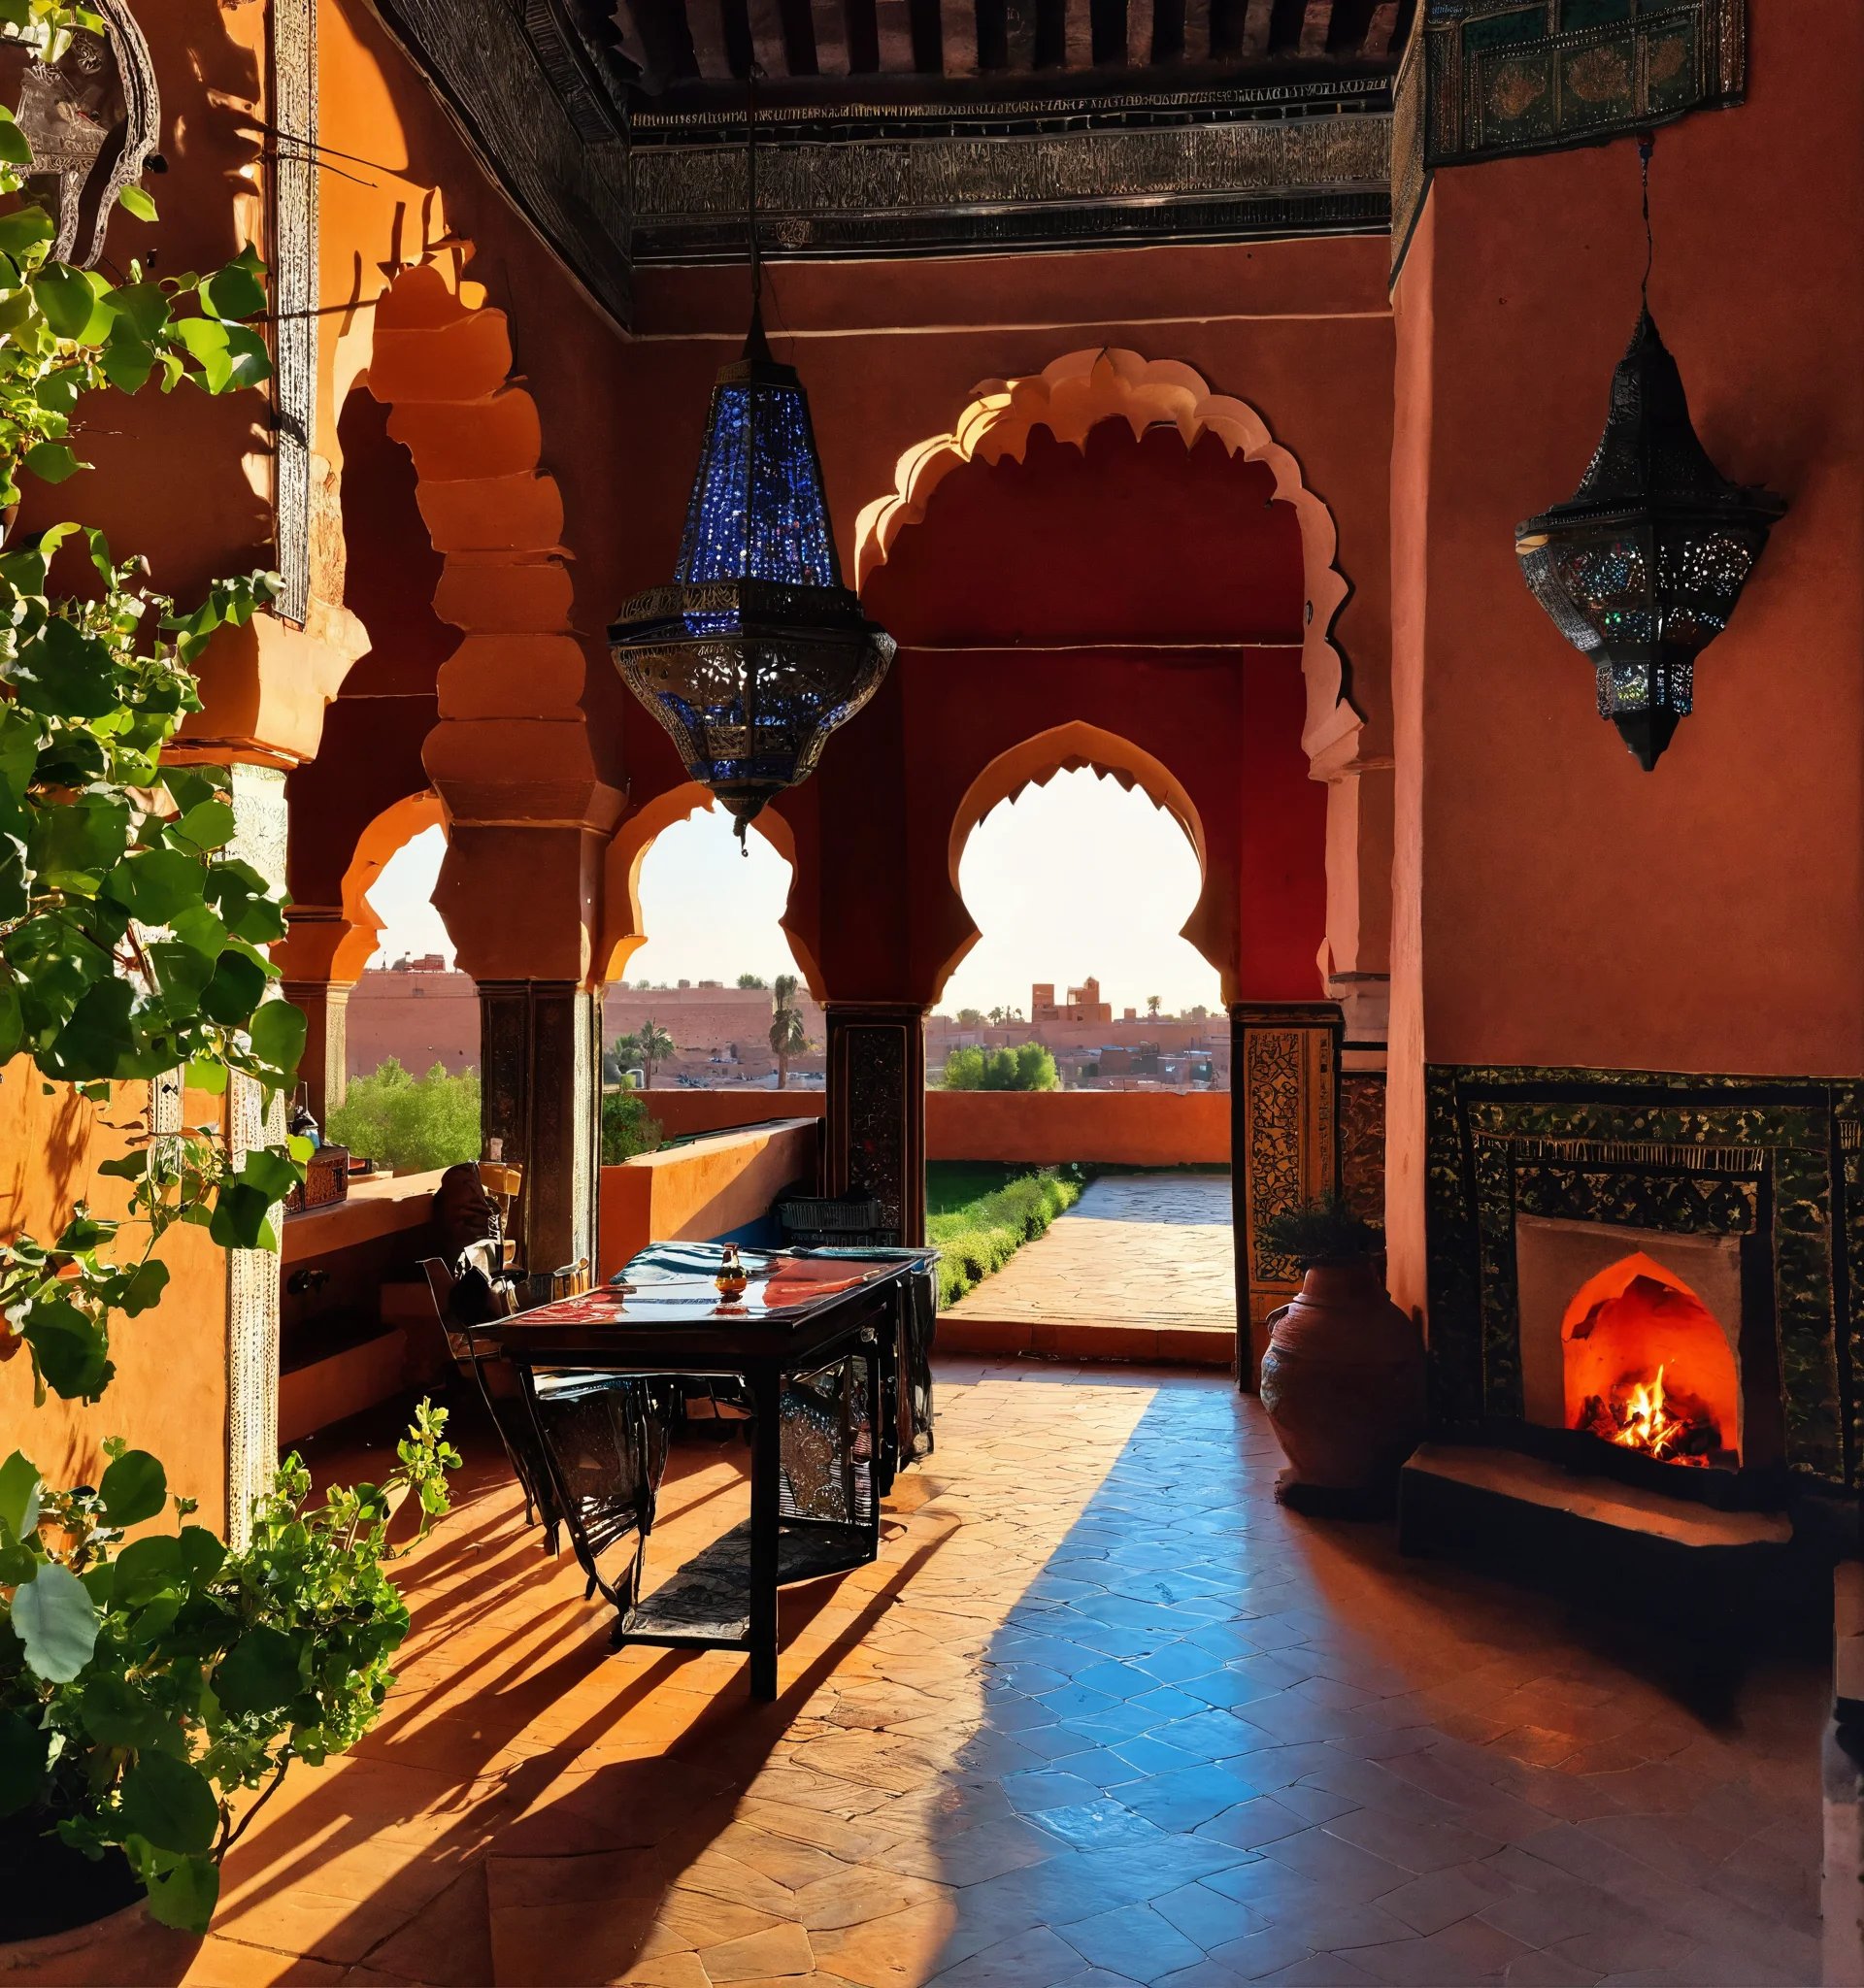 Discover Marrakech: visit old Medina, Souks, Monuments, and square